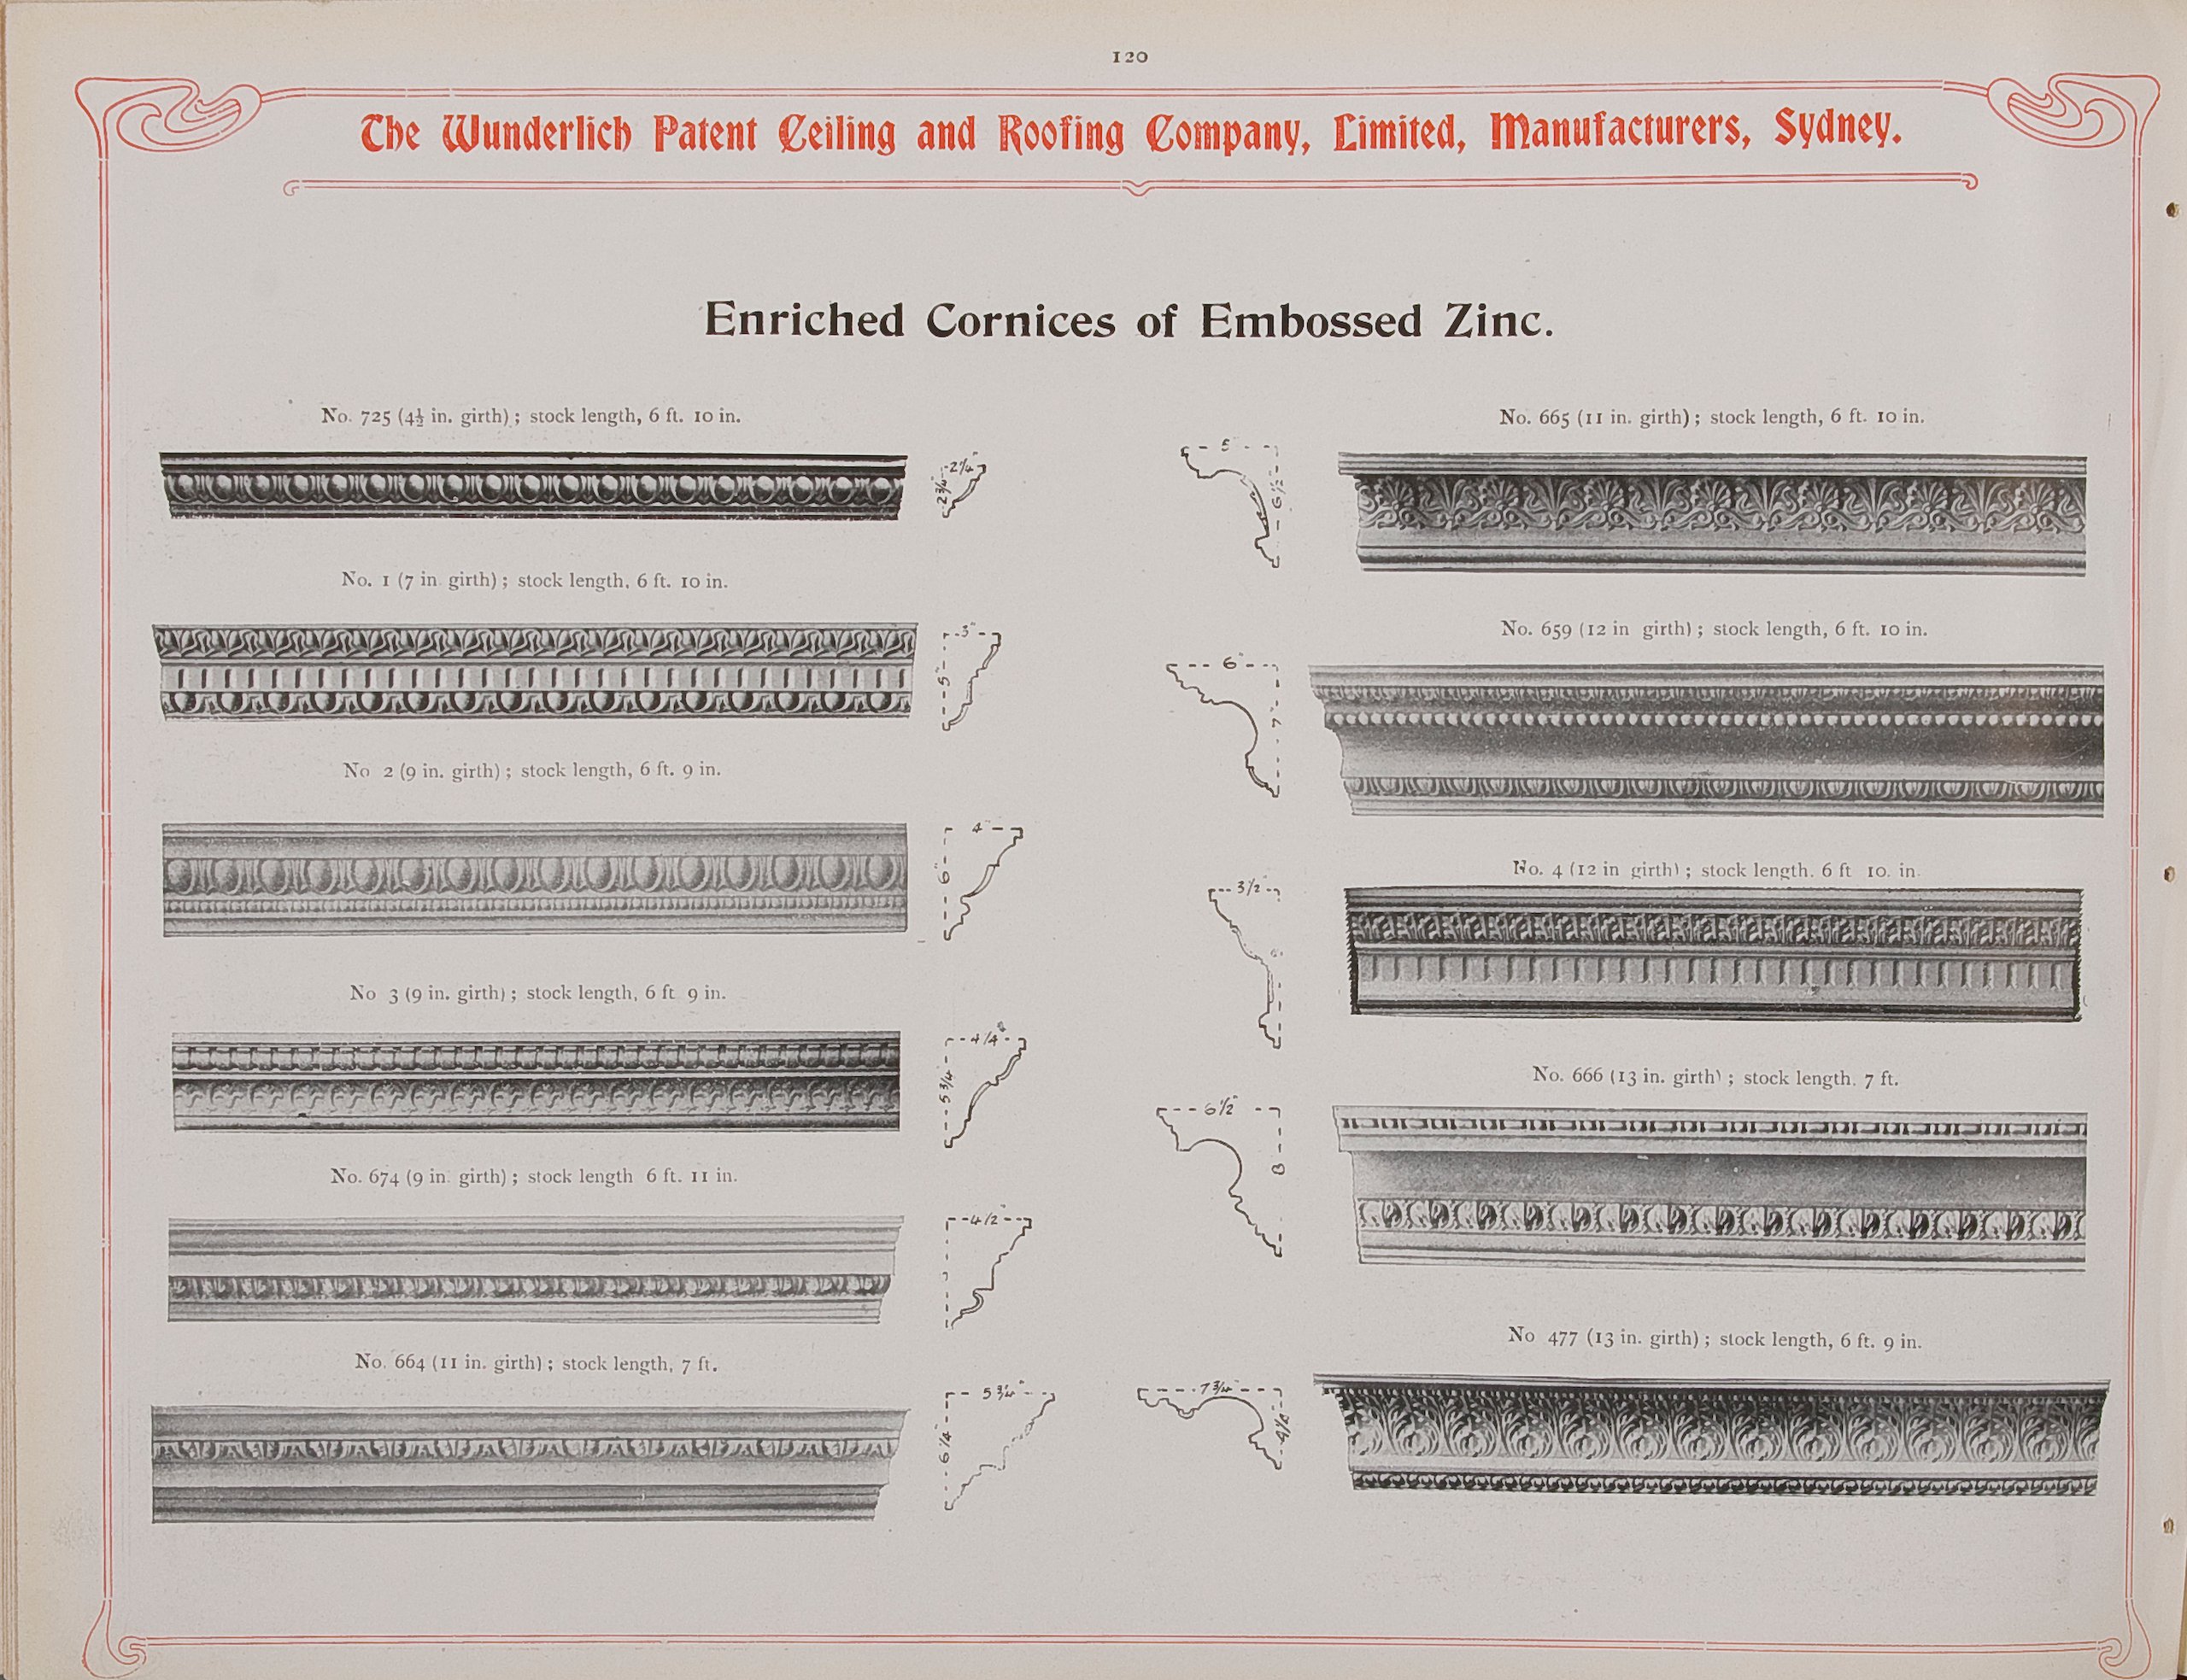 Page from Wunderlich catalogue 'Zinc Ceiling Materials'